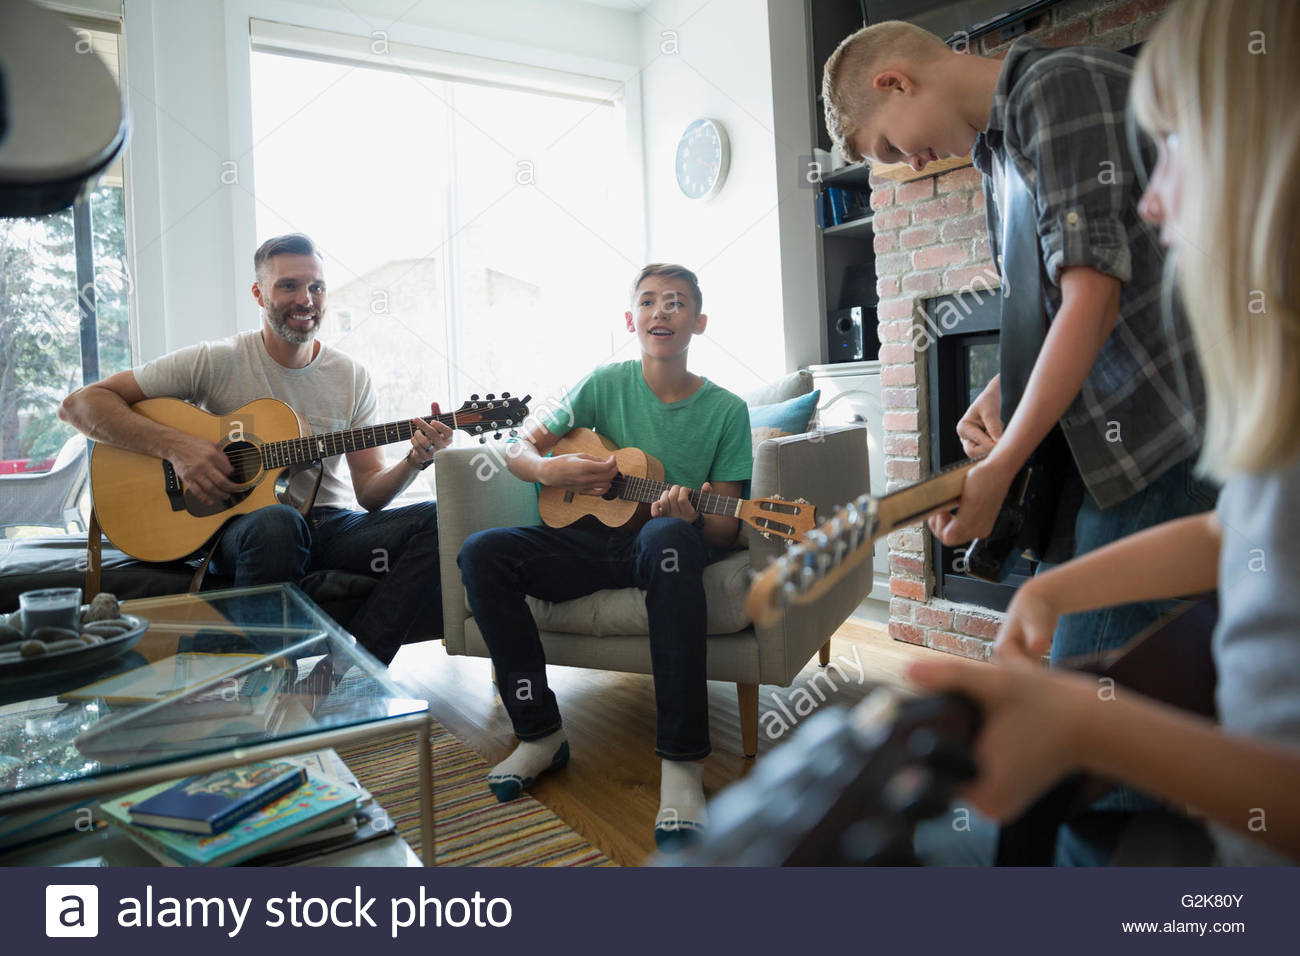 Family playing guitars in living room Stock Photo